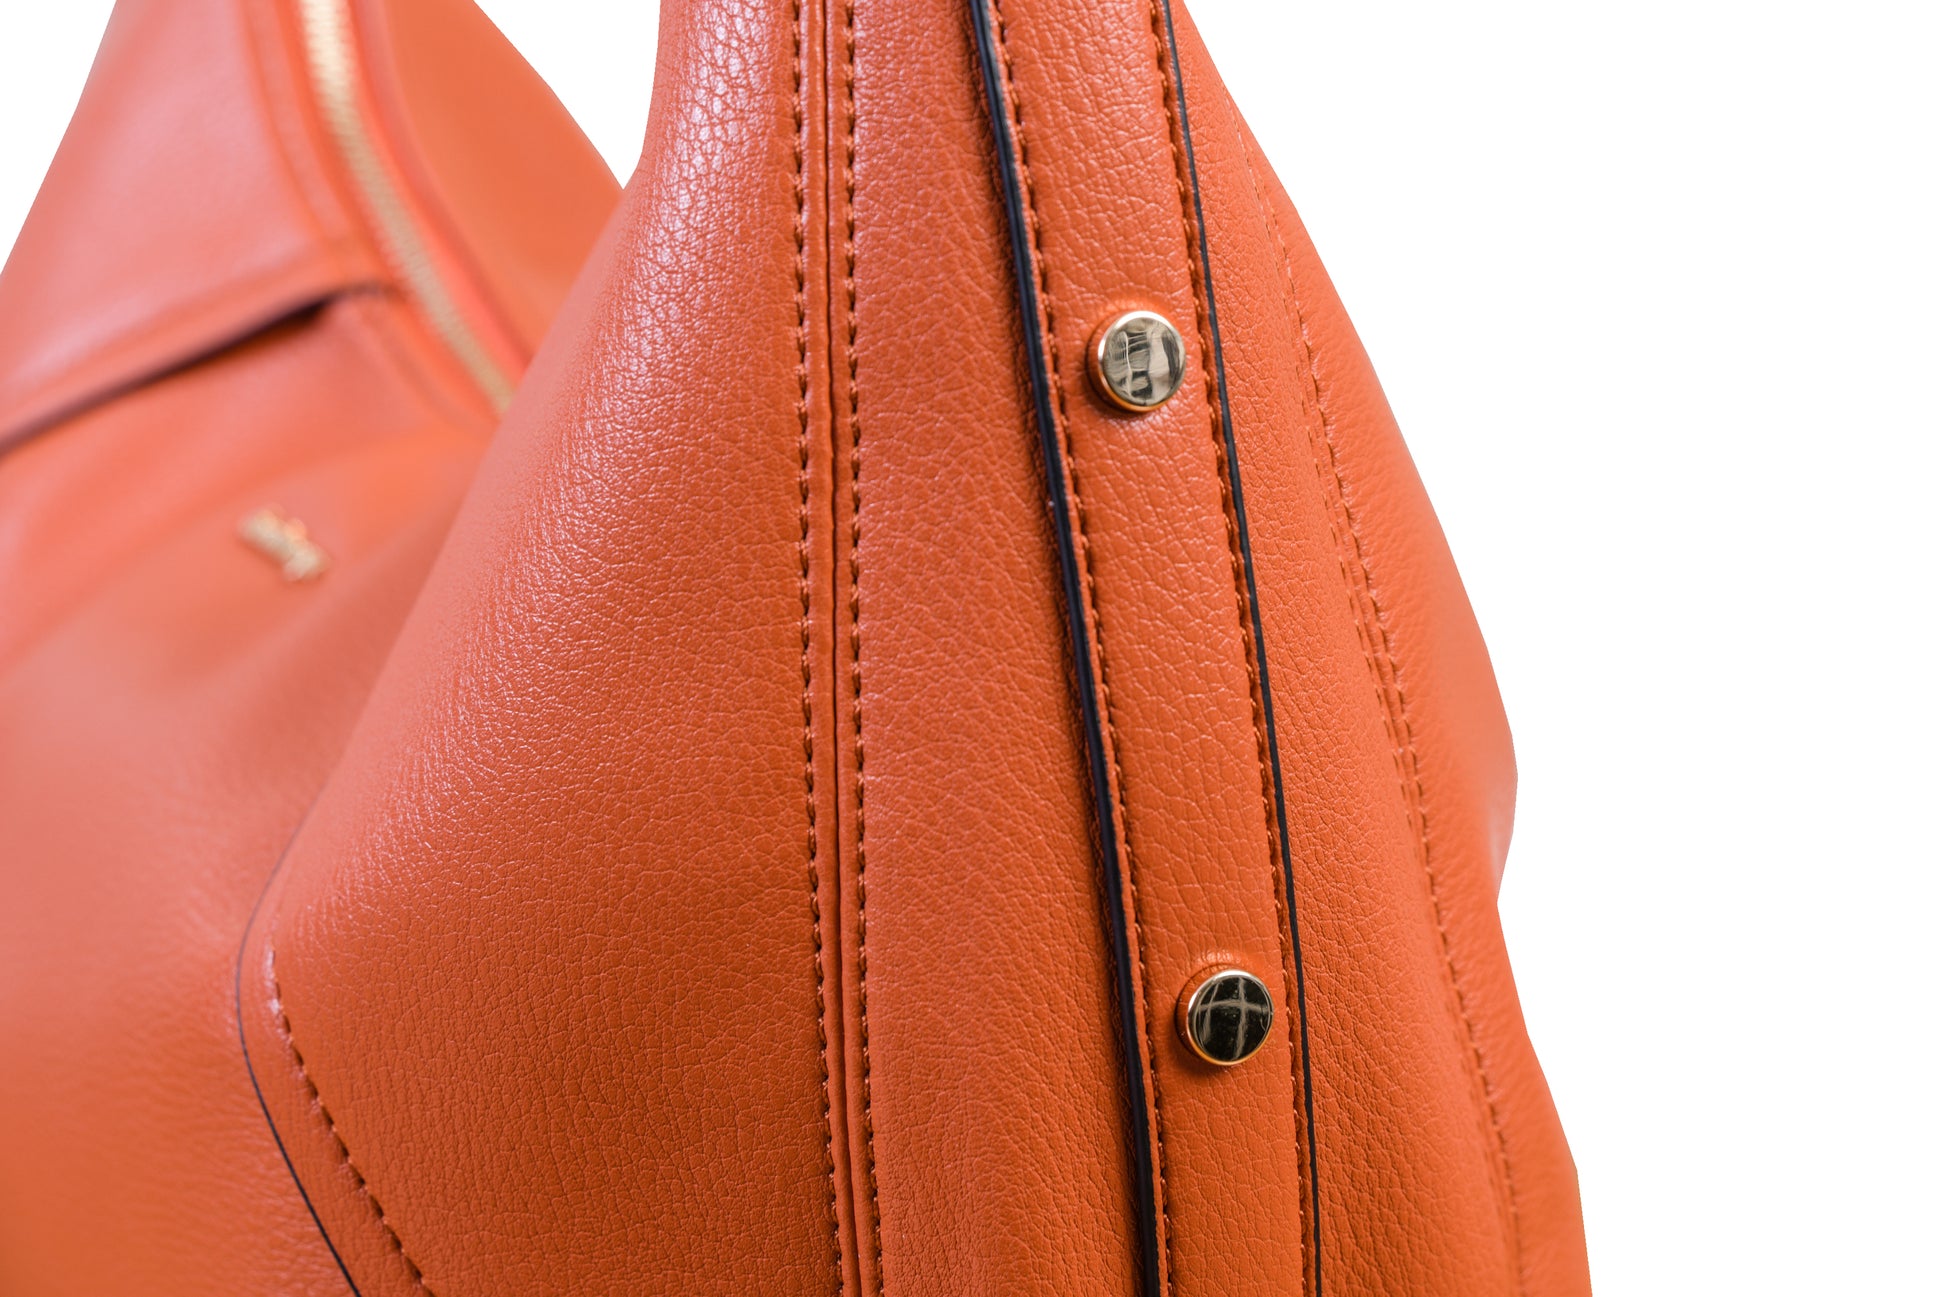 Luna Orange Sunset Crescent Pebble Grain Faux Leather Handbag made by Dewi Maya detail photo of gold rivets available at the best boutique in Upstate South Carolina Spartanburg Greenville Dewi Maya Boutique